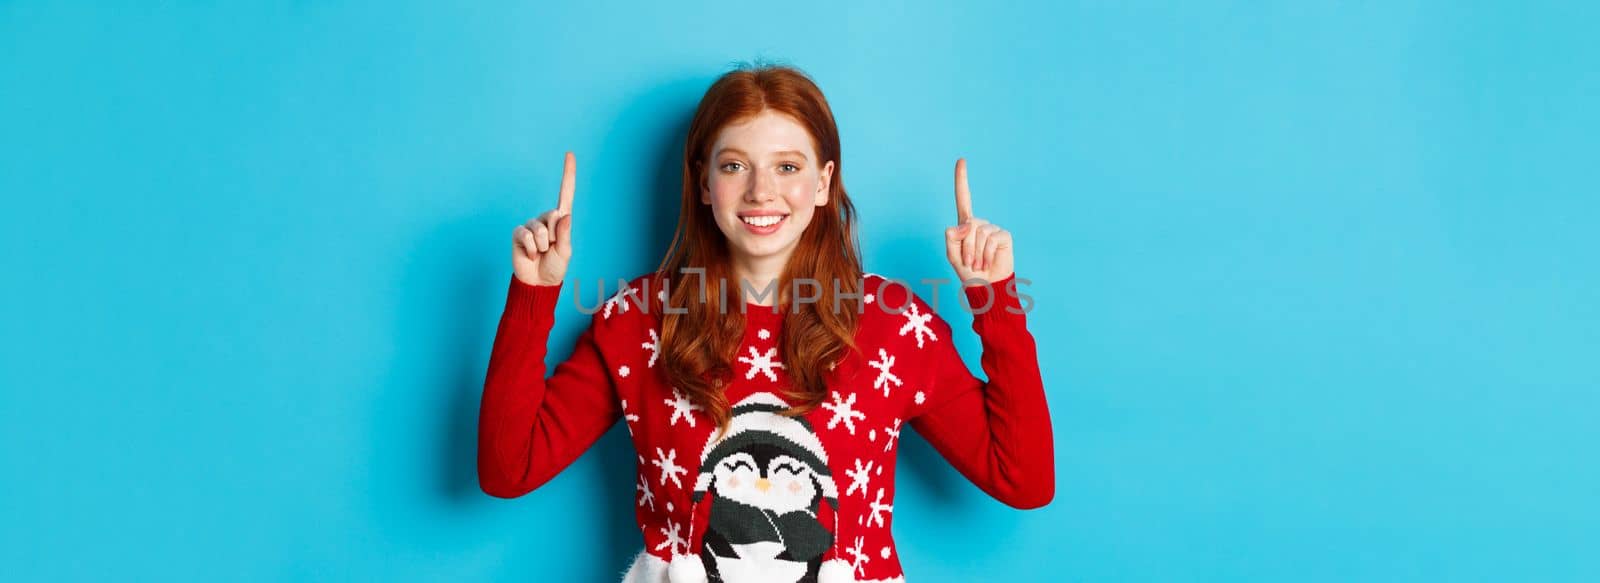 Winter holidays and celebration concept. Cute redhead girl in Christmas sweater, smiling and pointing fingers up at promo logo, standing over blue background.